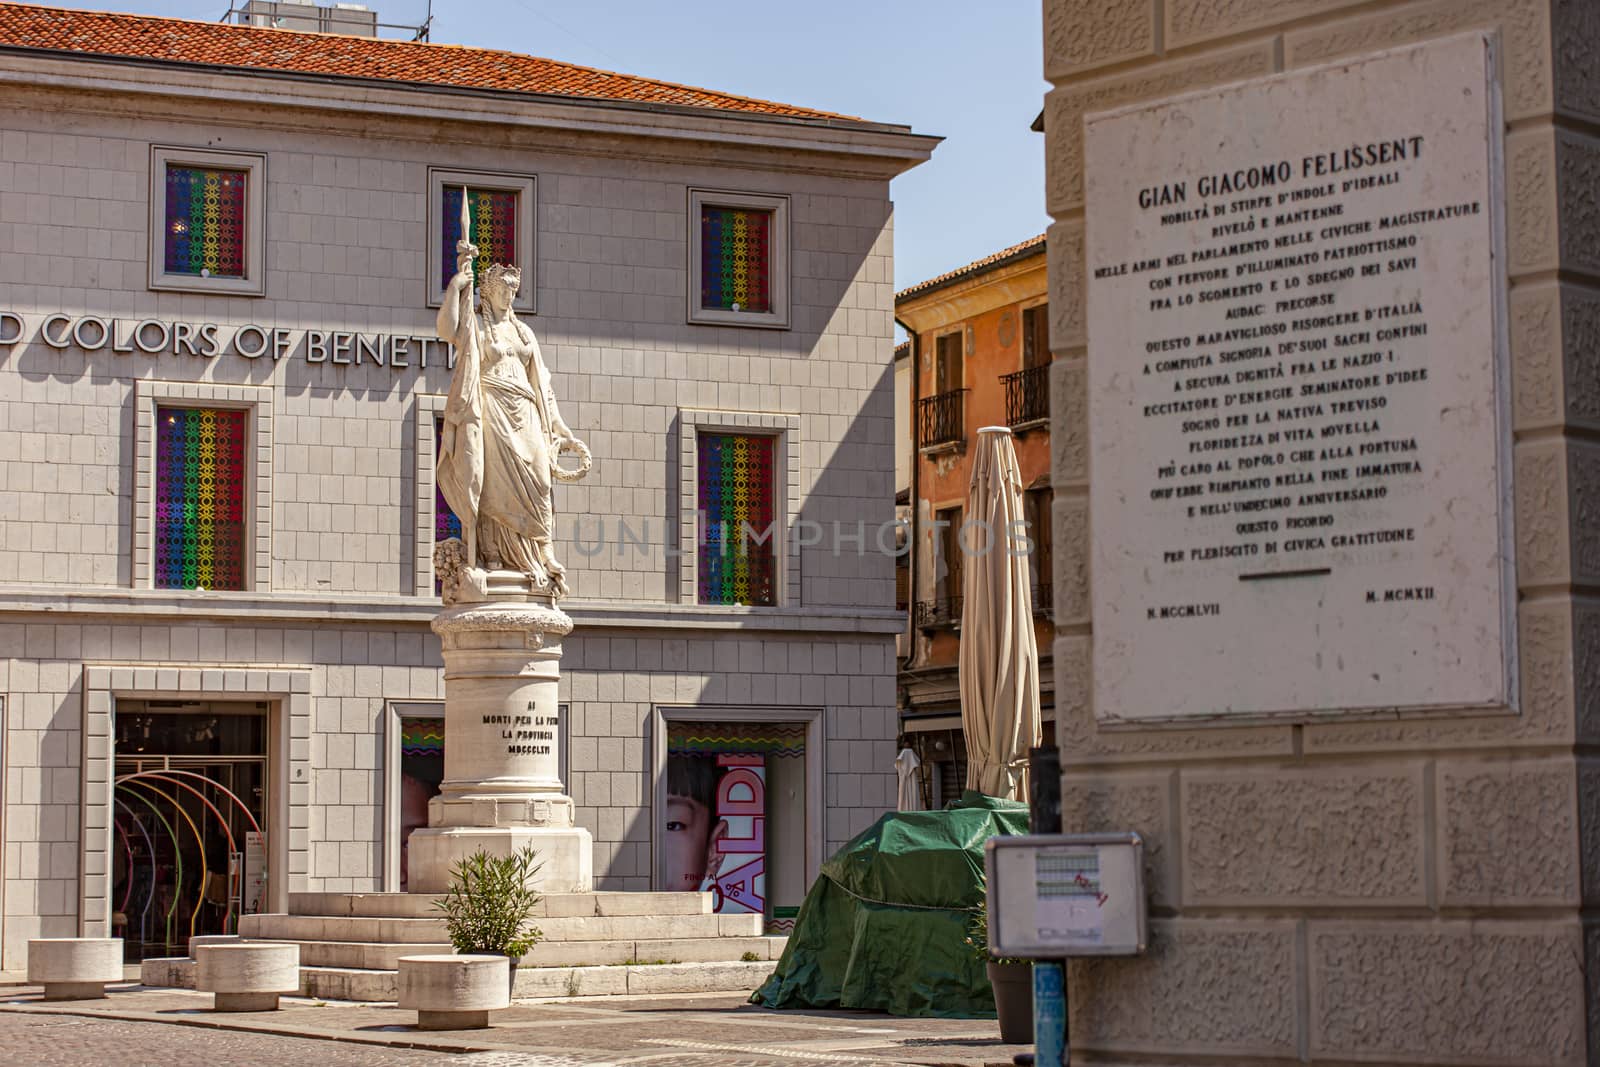 TREVISO, ITALY 13 AUGUST 2020: Independence statue in Historical city center of Treviso in Italy